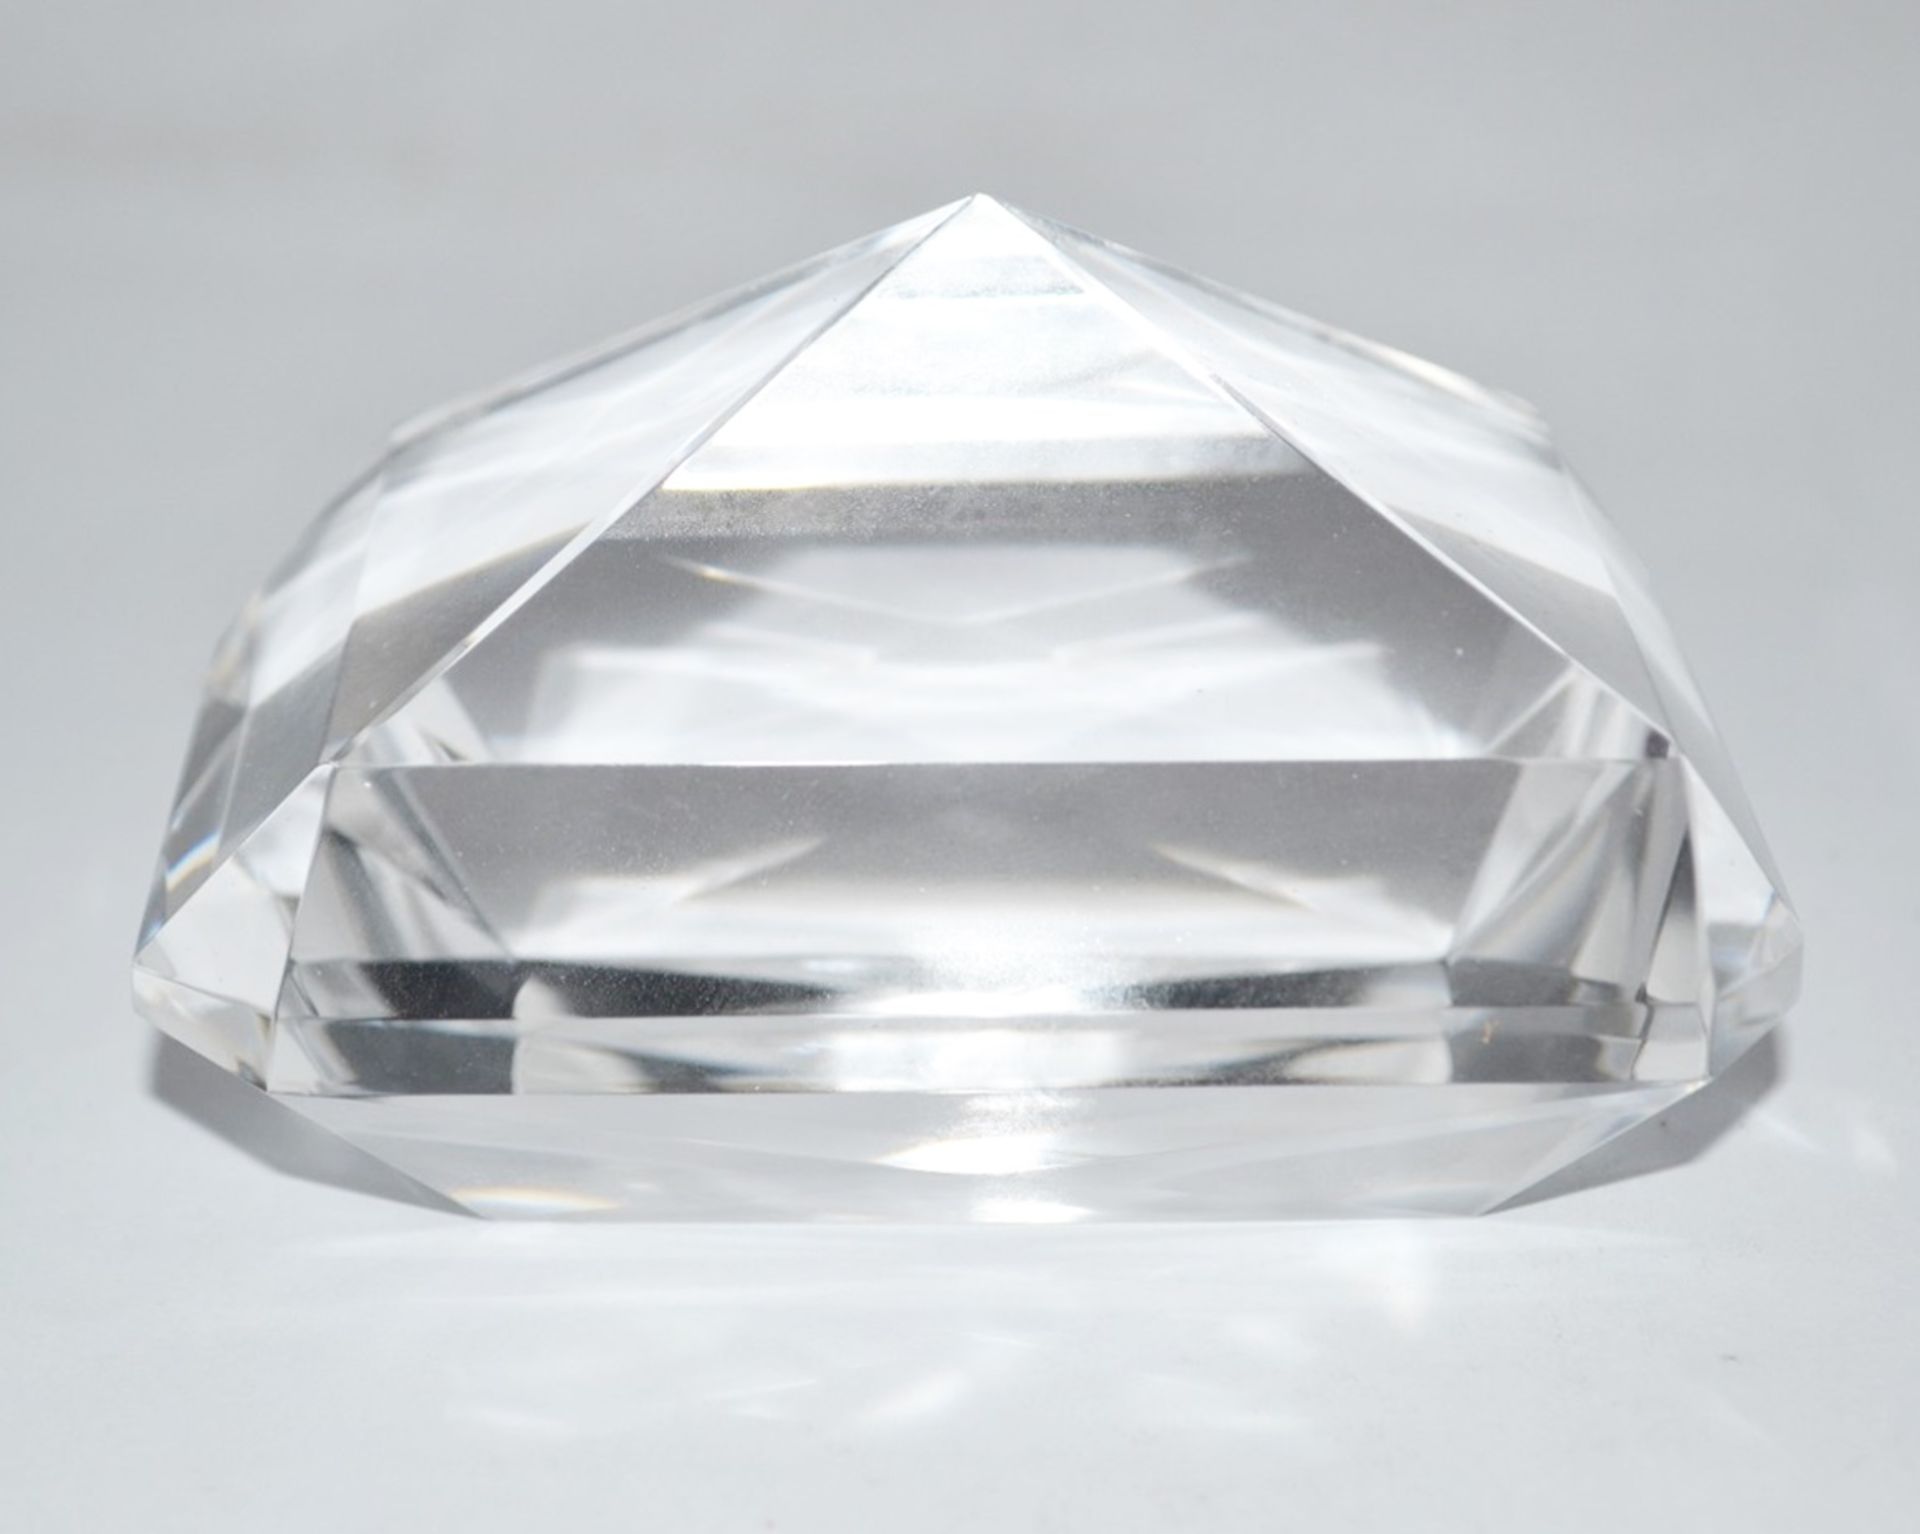 10 x ICE London Emerald Shaped Crystal Paperweight - Colour: Clear - 100mm In Diameter - New & Boxed - Image 4 of 4